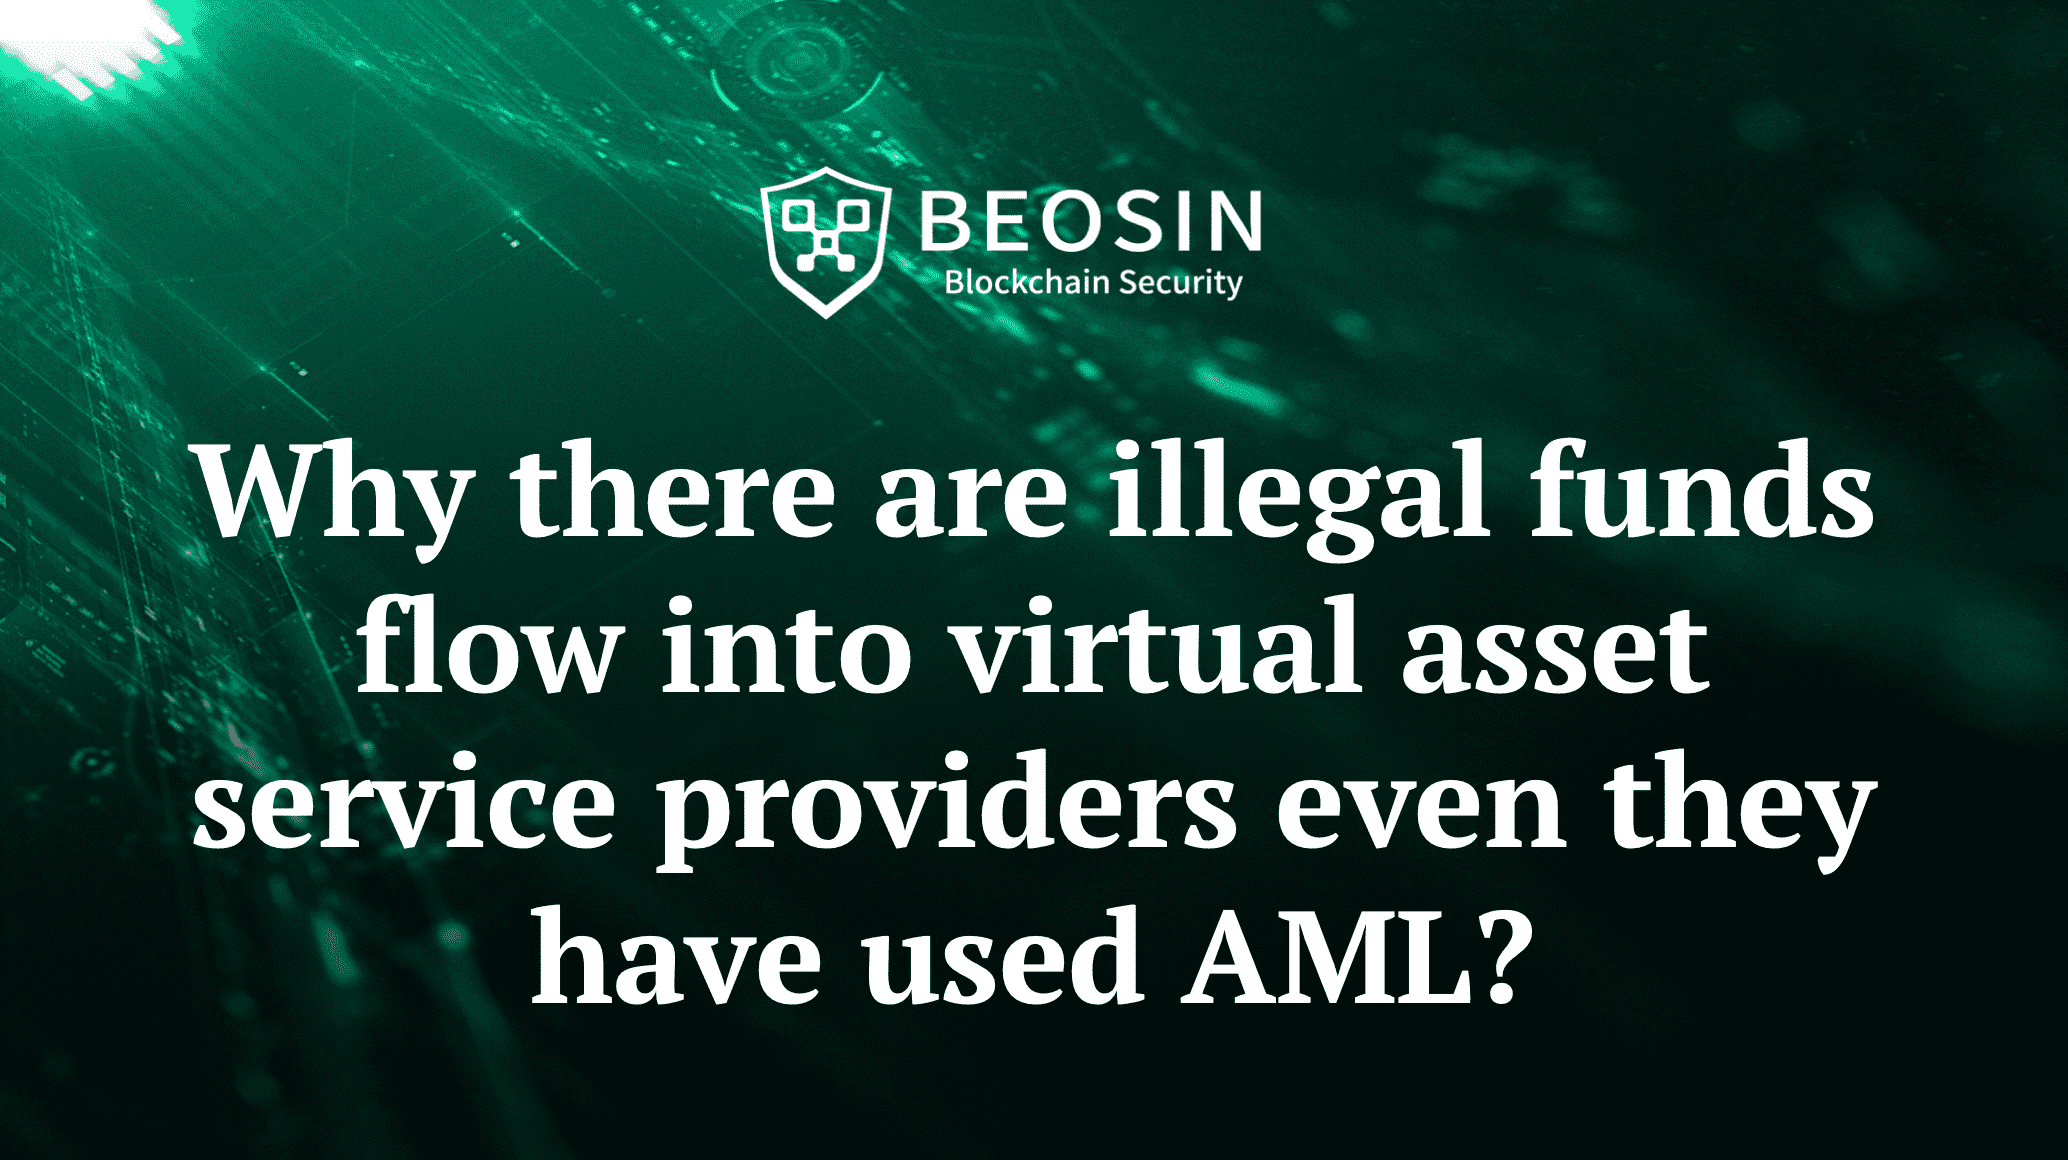 Why there are illegal funds flow into virtual asset service providers even they have used AML?